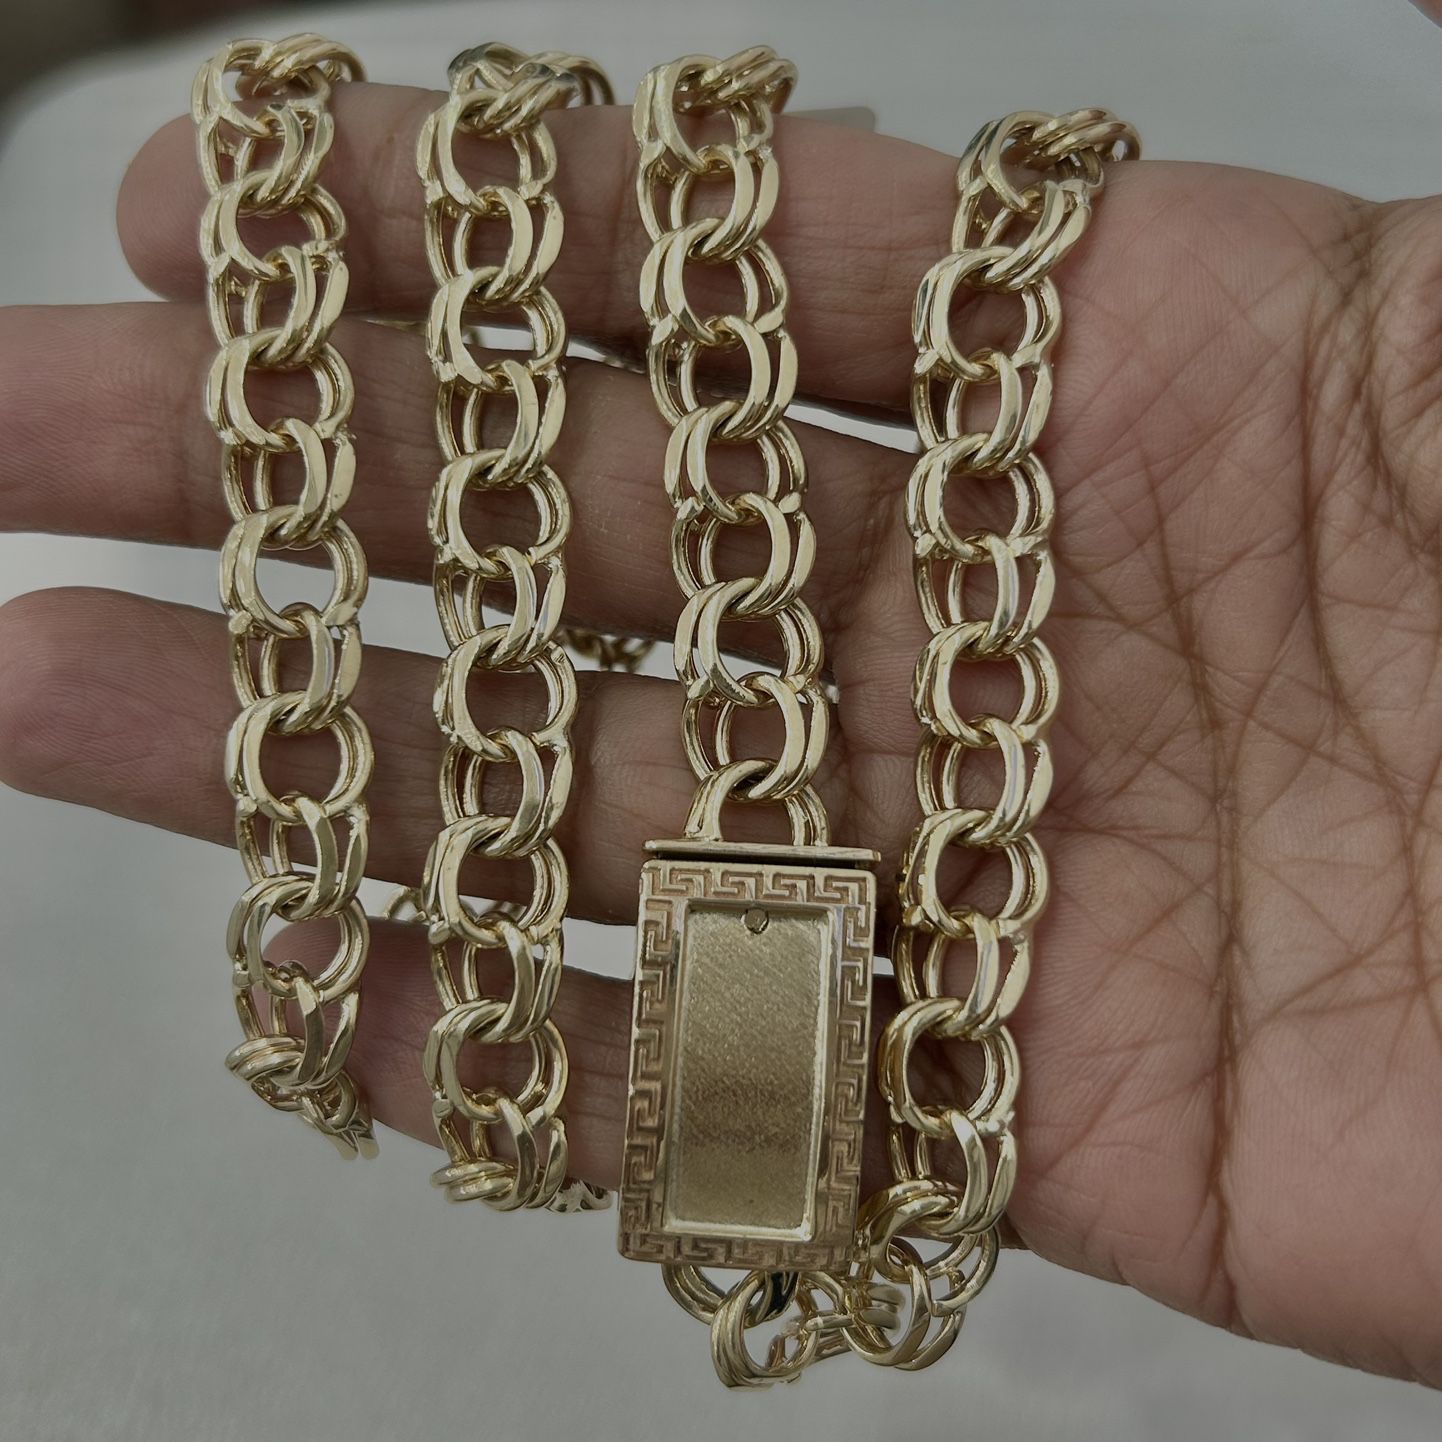 73.6 Gms 10KT Yellow Gold Solid Chino Link Chain With Designer ID Lock